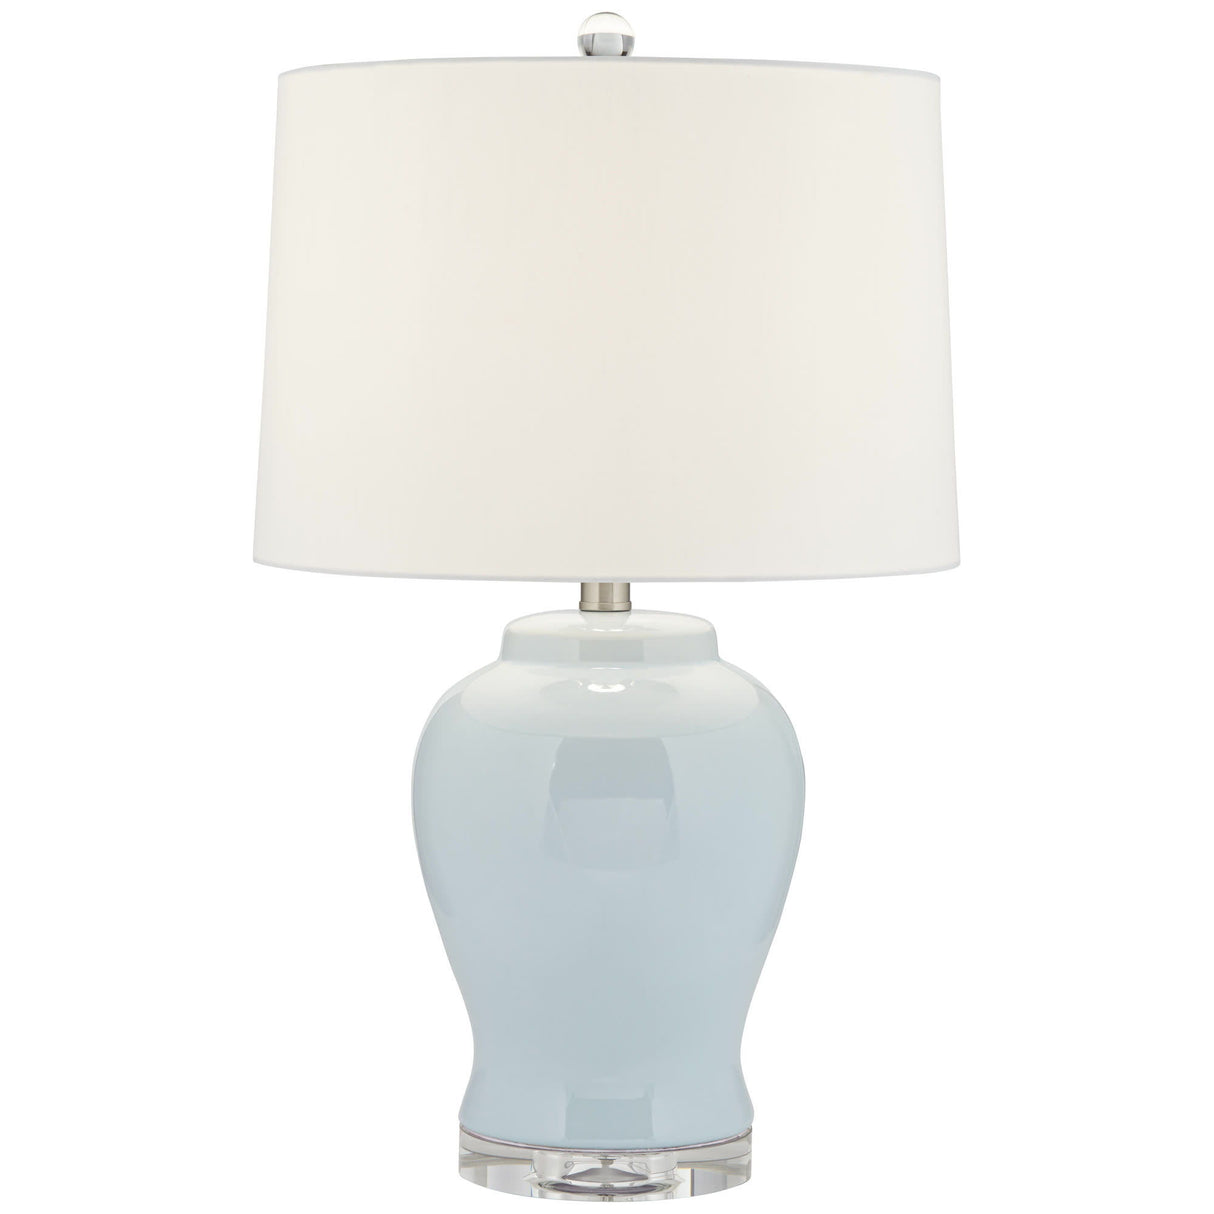 Serenity - Table Lamp - Icy Blue